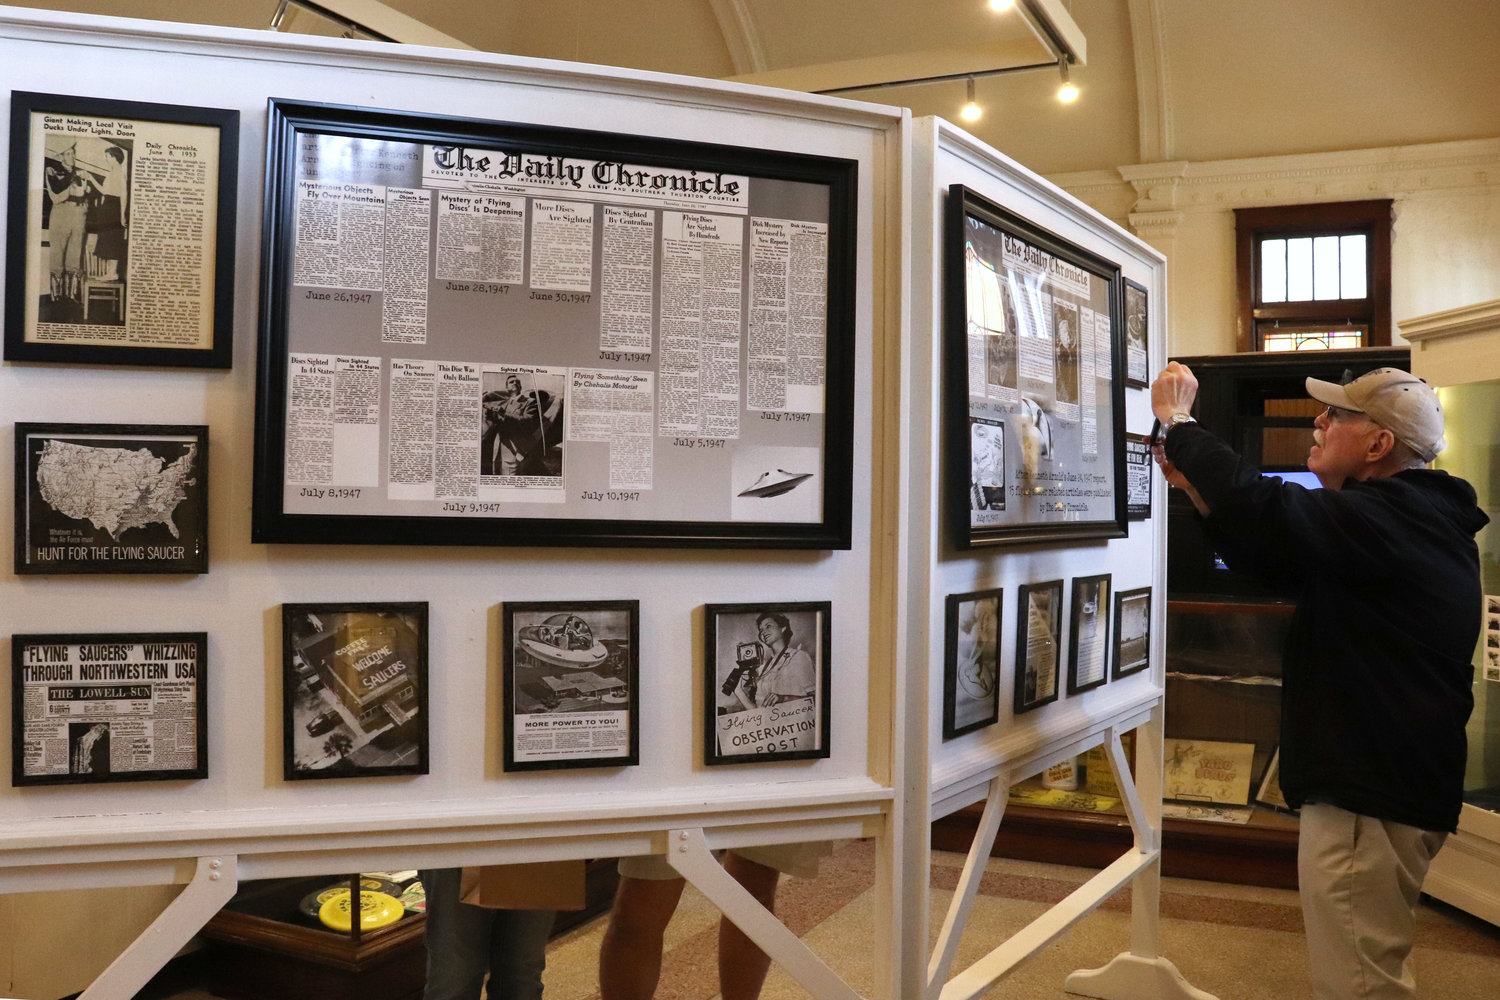 A Lewis County Historical Museum attendee takes photos of old Chronicle articles on display as part of a UFO exhibit during the Chehalis Flying Saucer Party on Saturday.